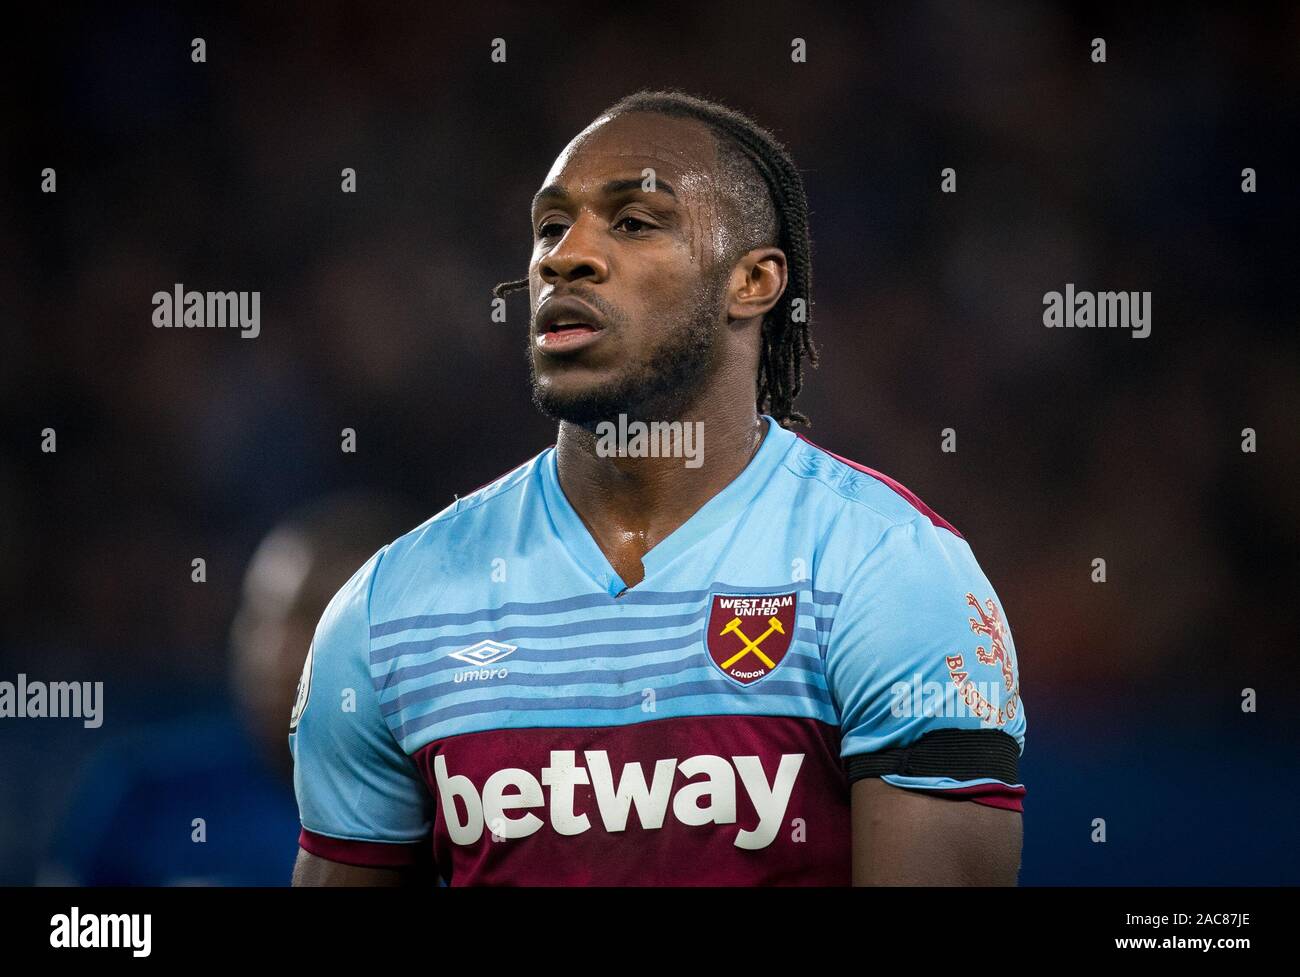 Michail Antonio of West Ham Utd during the Premier League match between Chelsea and West Ham United at Stamford Bridge, London, England on 30 November Stock Photo